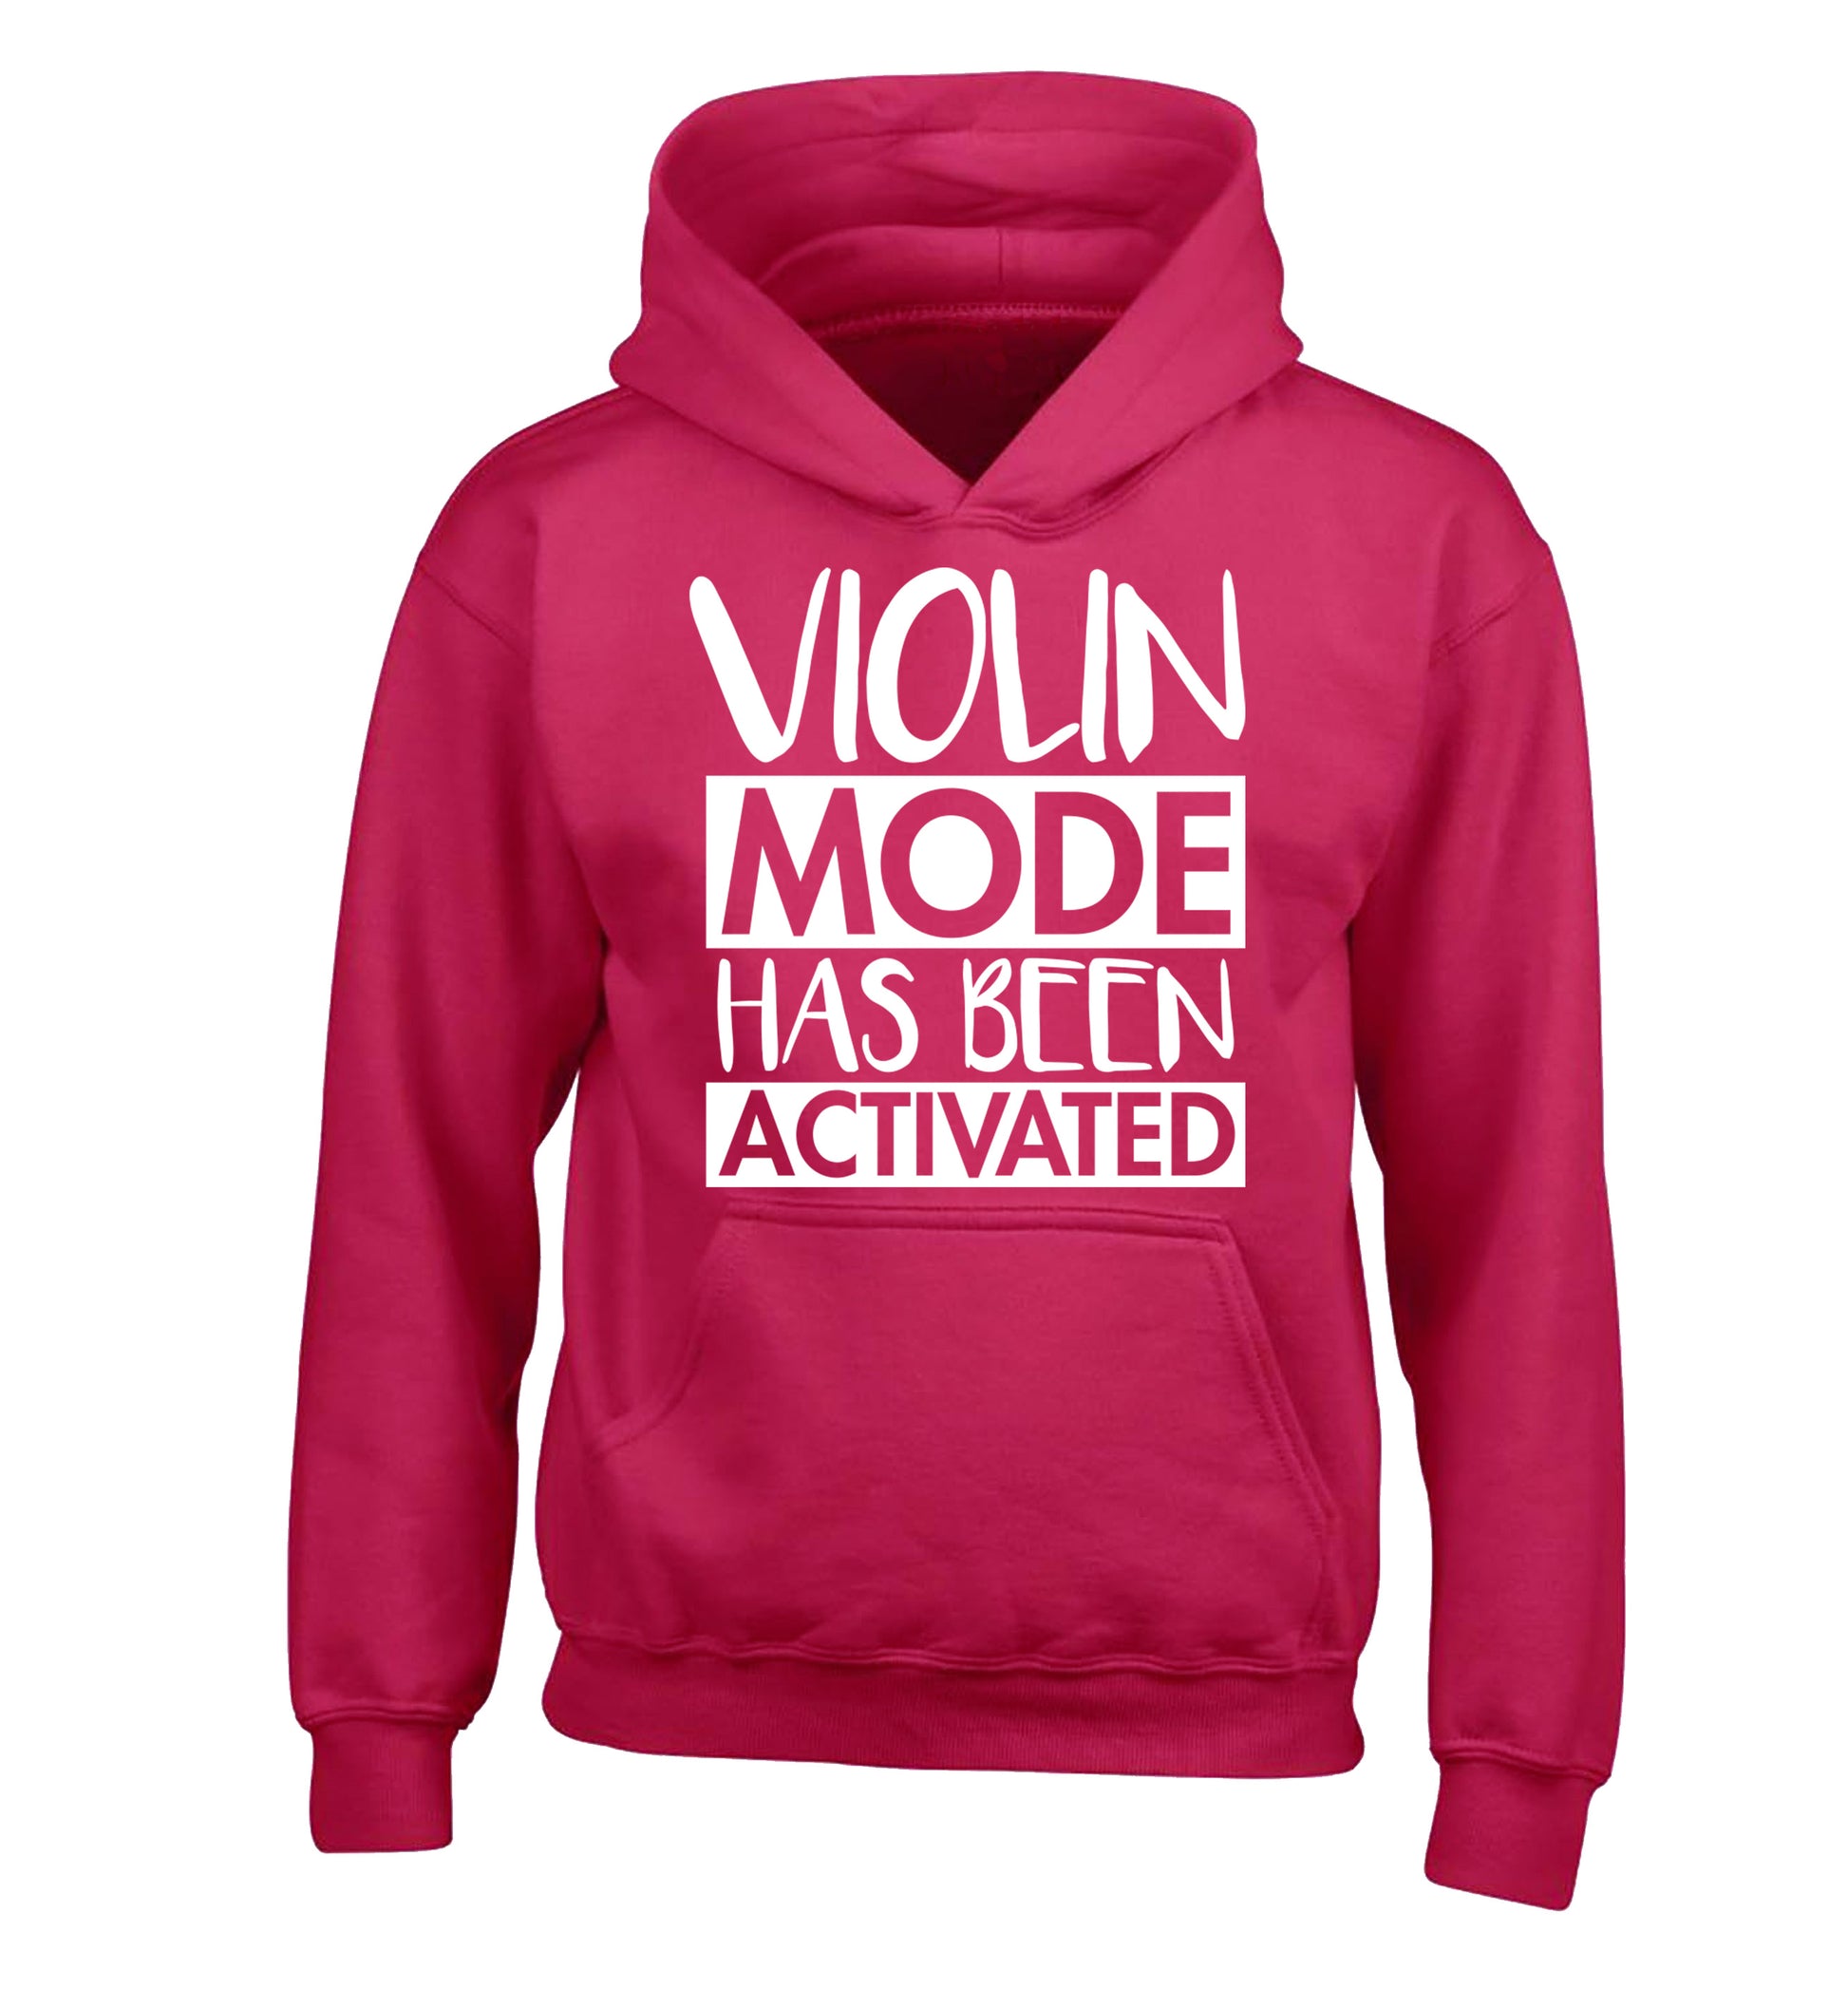 Violin Mode Activated children's pink hoodie 12-13 Years